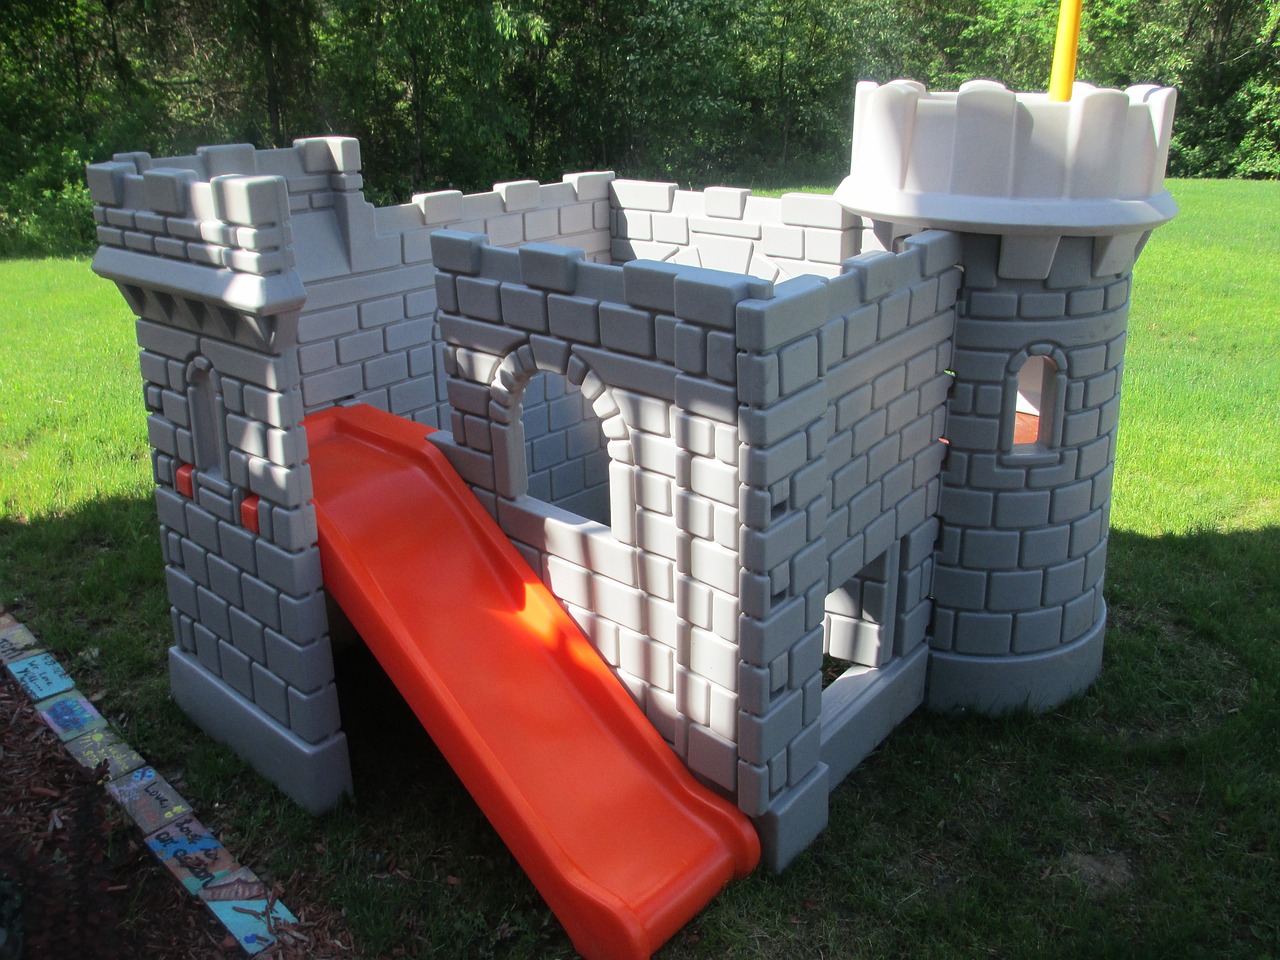 castle toy play free photo